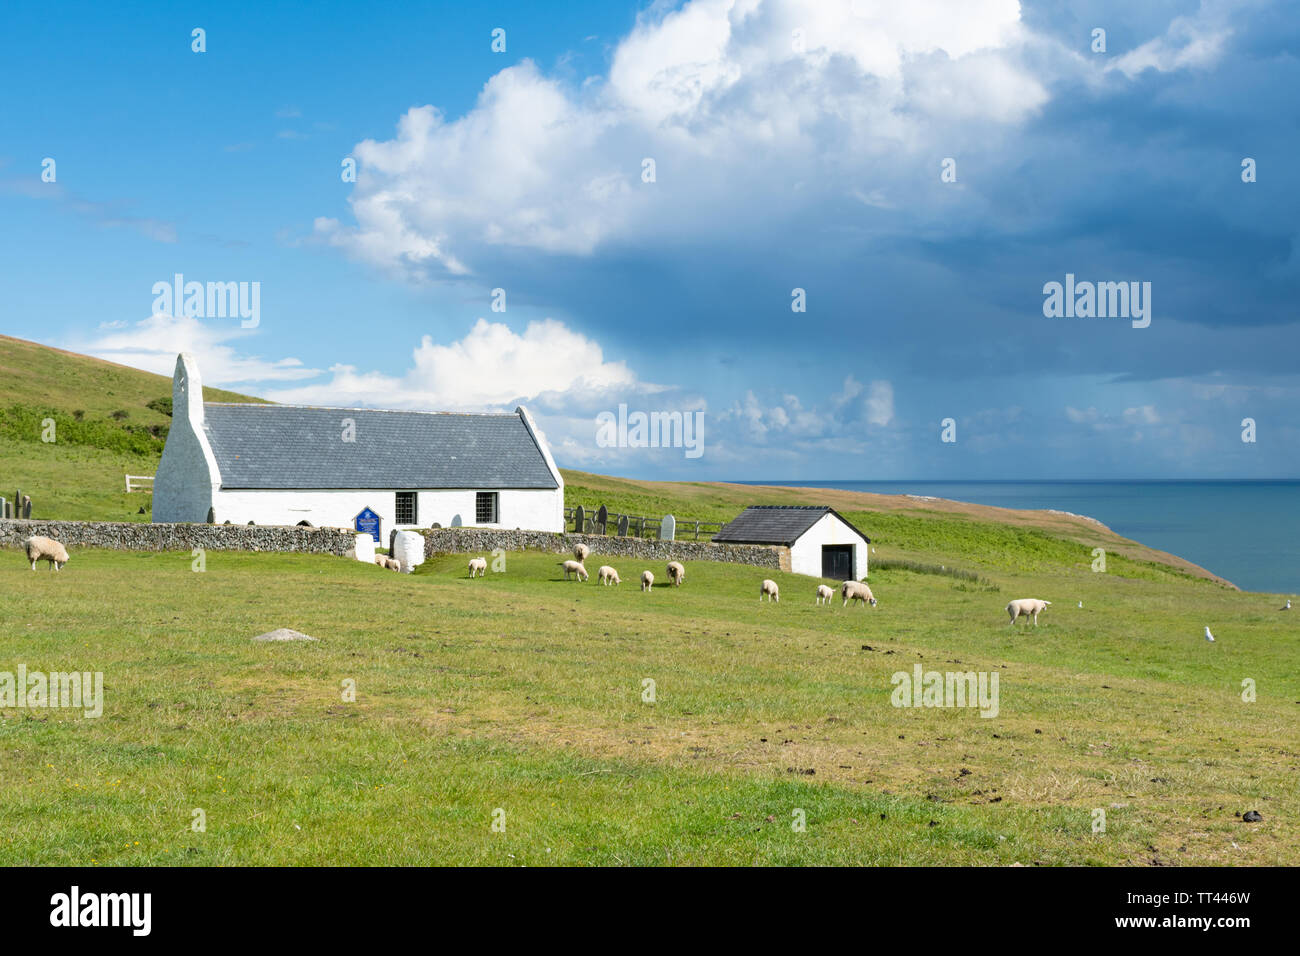 The Church of the Holy Cross (Welsh: Eglwys y Grog), an example of a medieval sailor's chapel of ease, at Mwnt Bay, Ceredigion, Wales Stock Photo